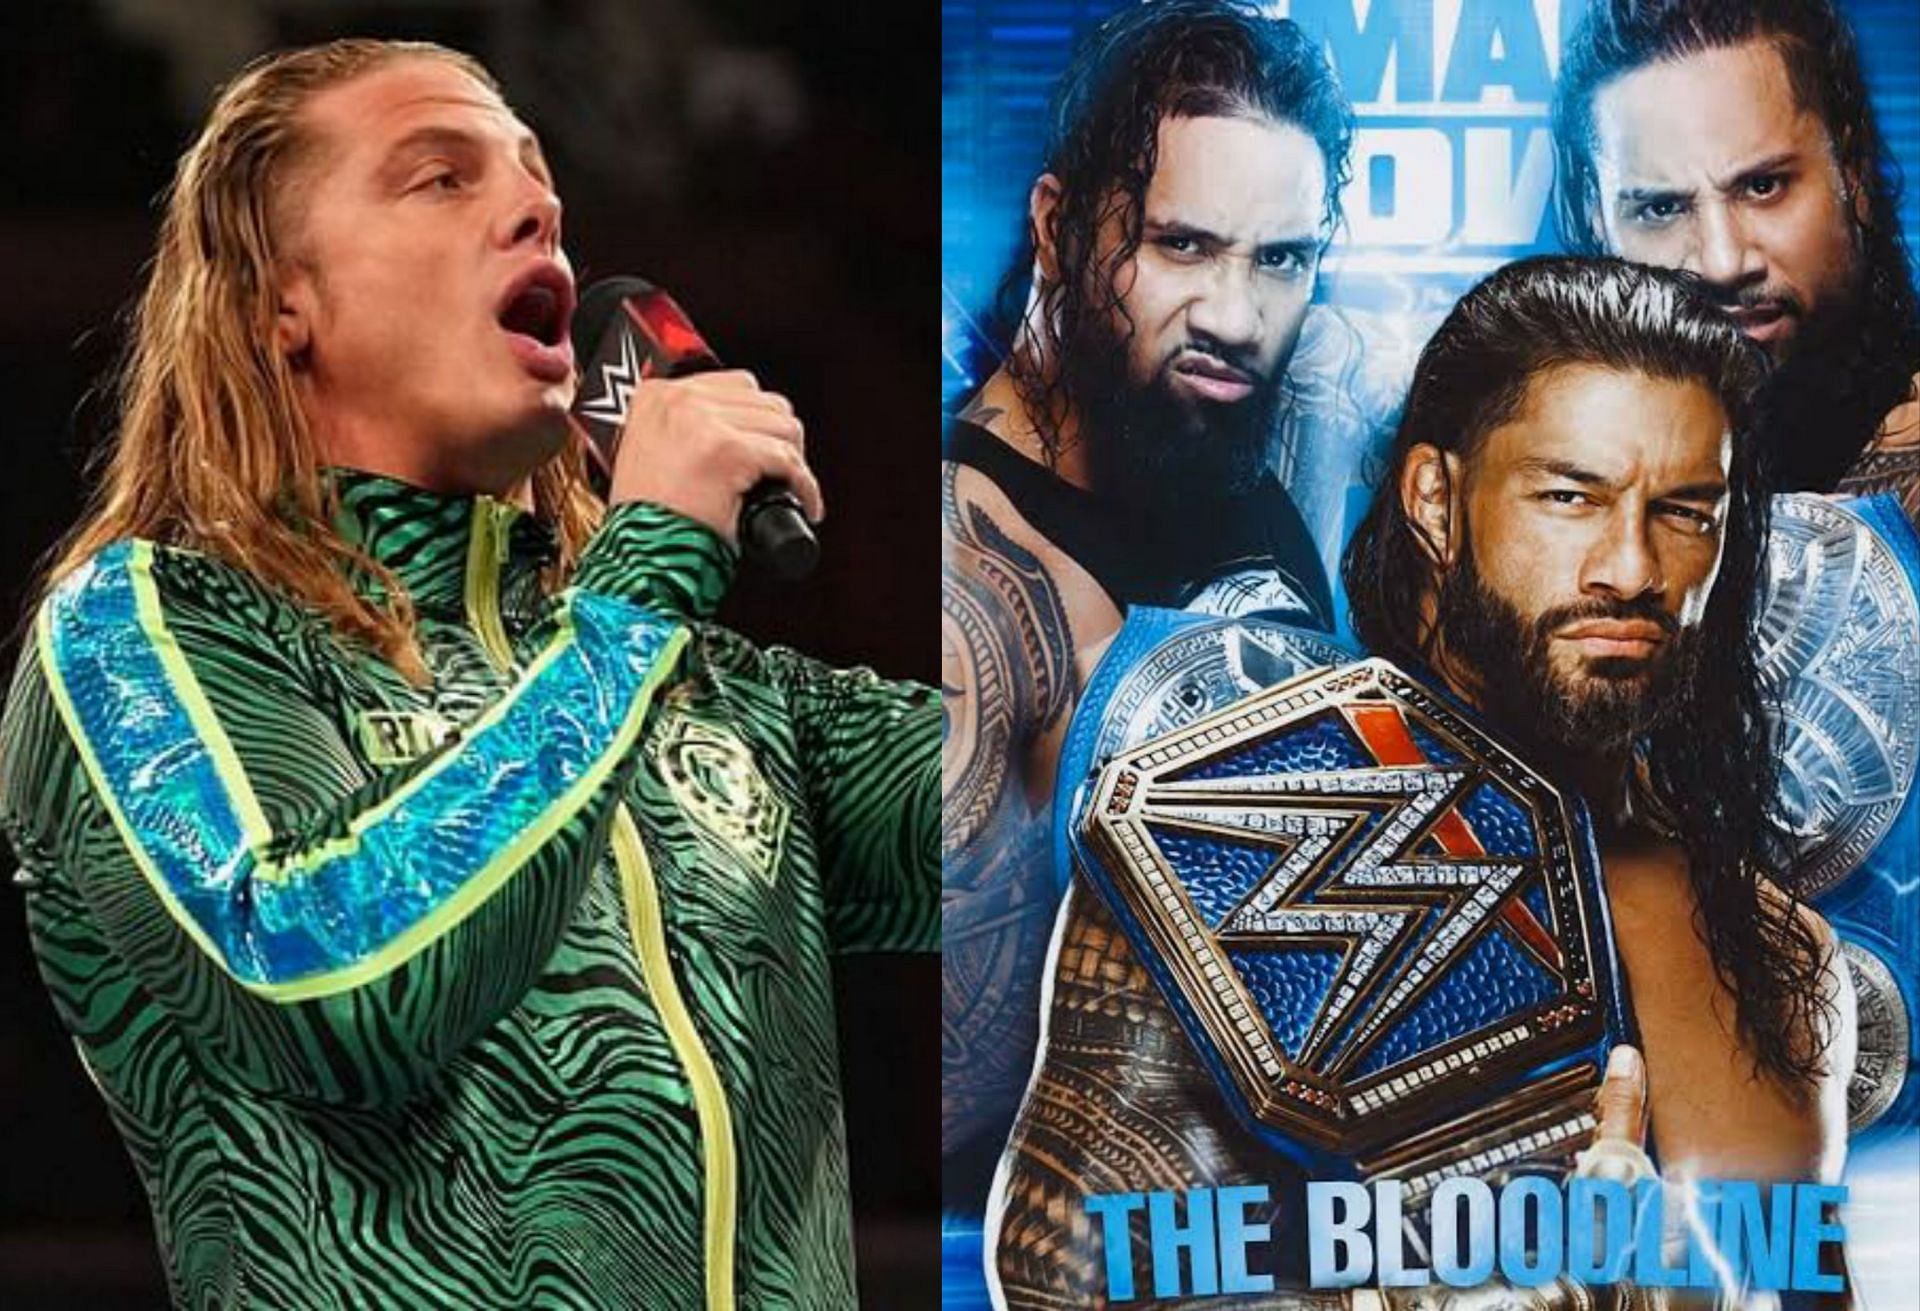 Riddle and Shinsuke Nakamura could stand tall over The Usos on the upcoming episode of SmackDown.